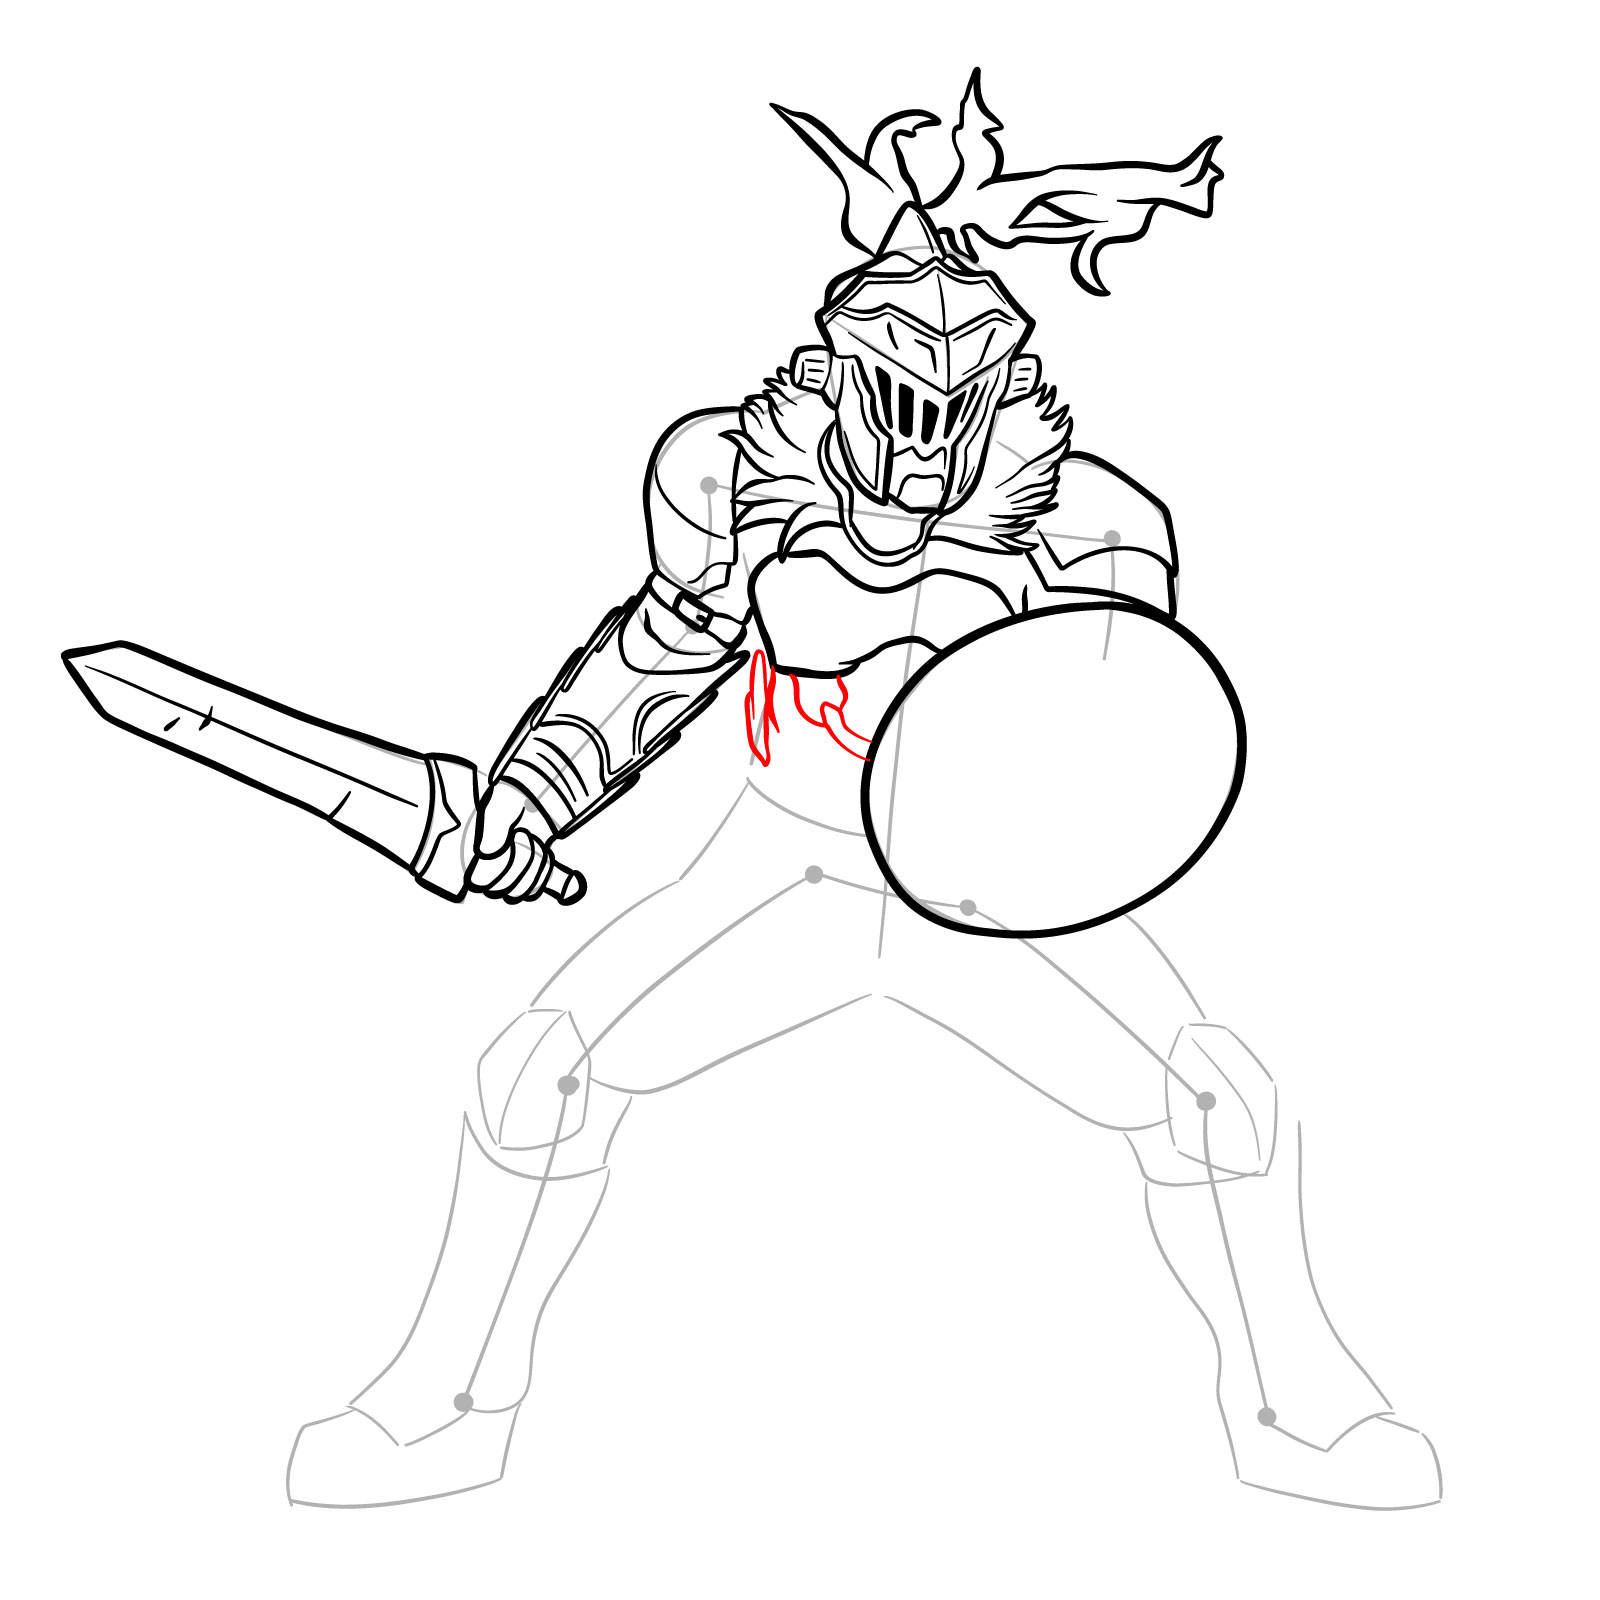 How to Draw Goblin Slayer in battle stance - step 24